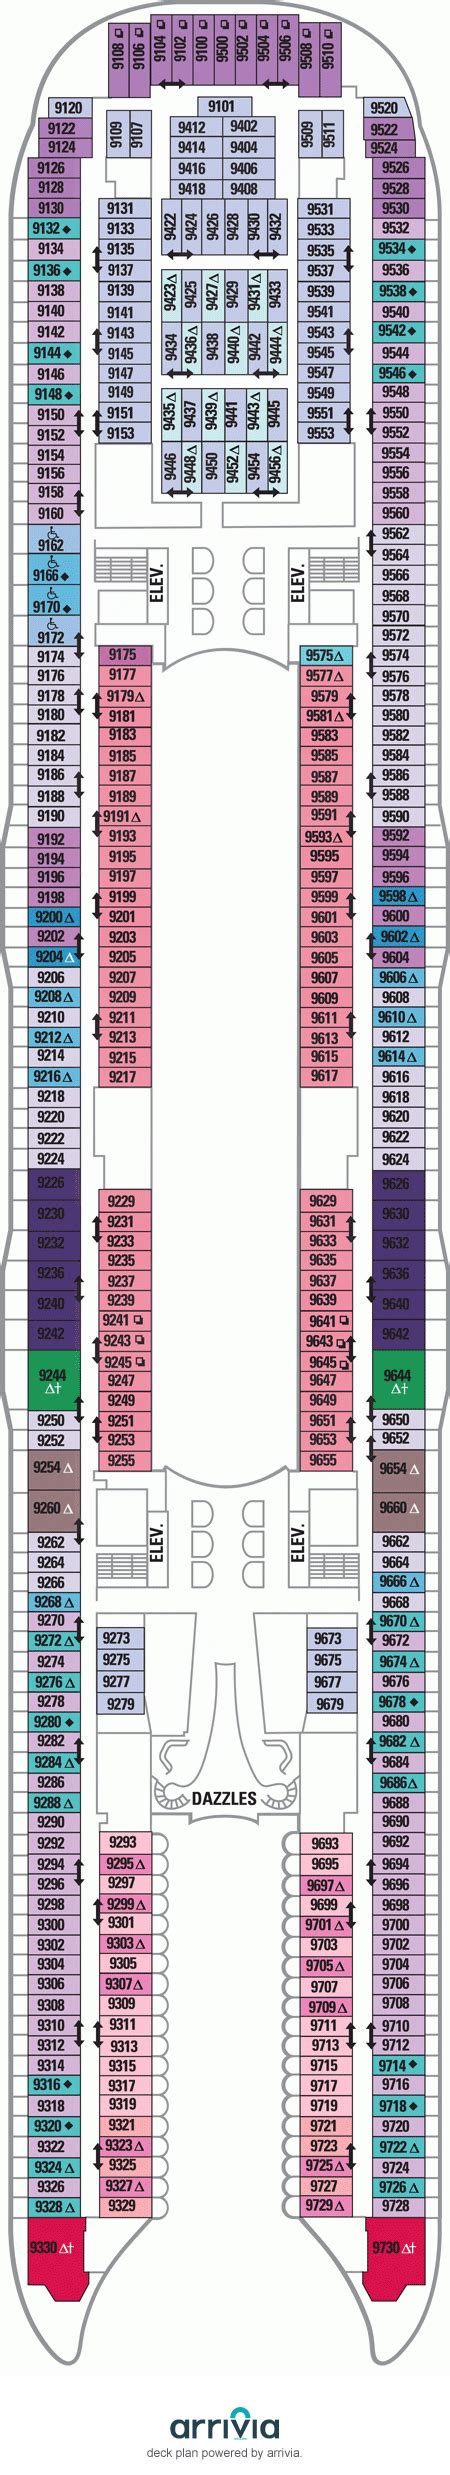 Deck plan of the allure of the seas cruise ship. Allure of the Seas Deck Plans